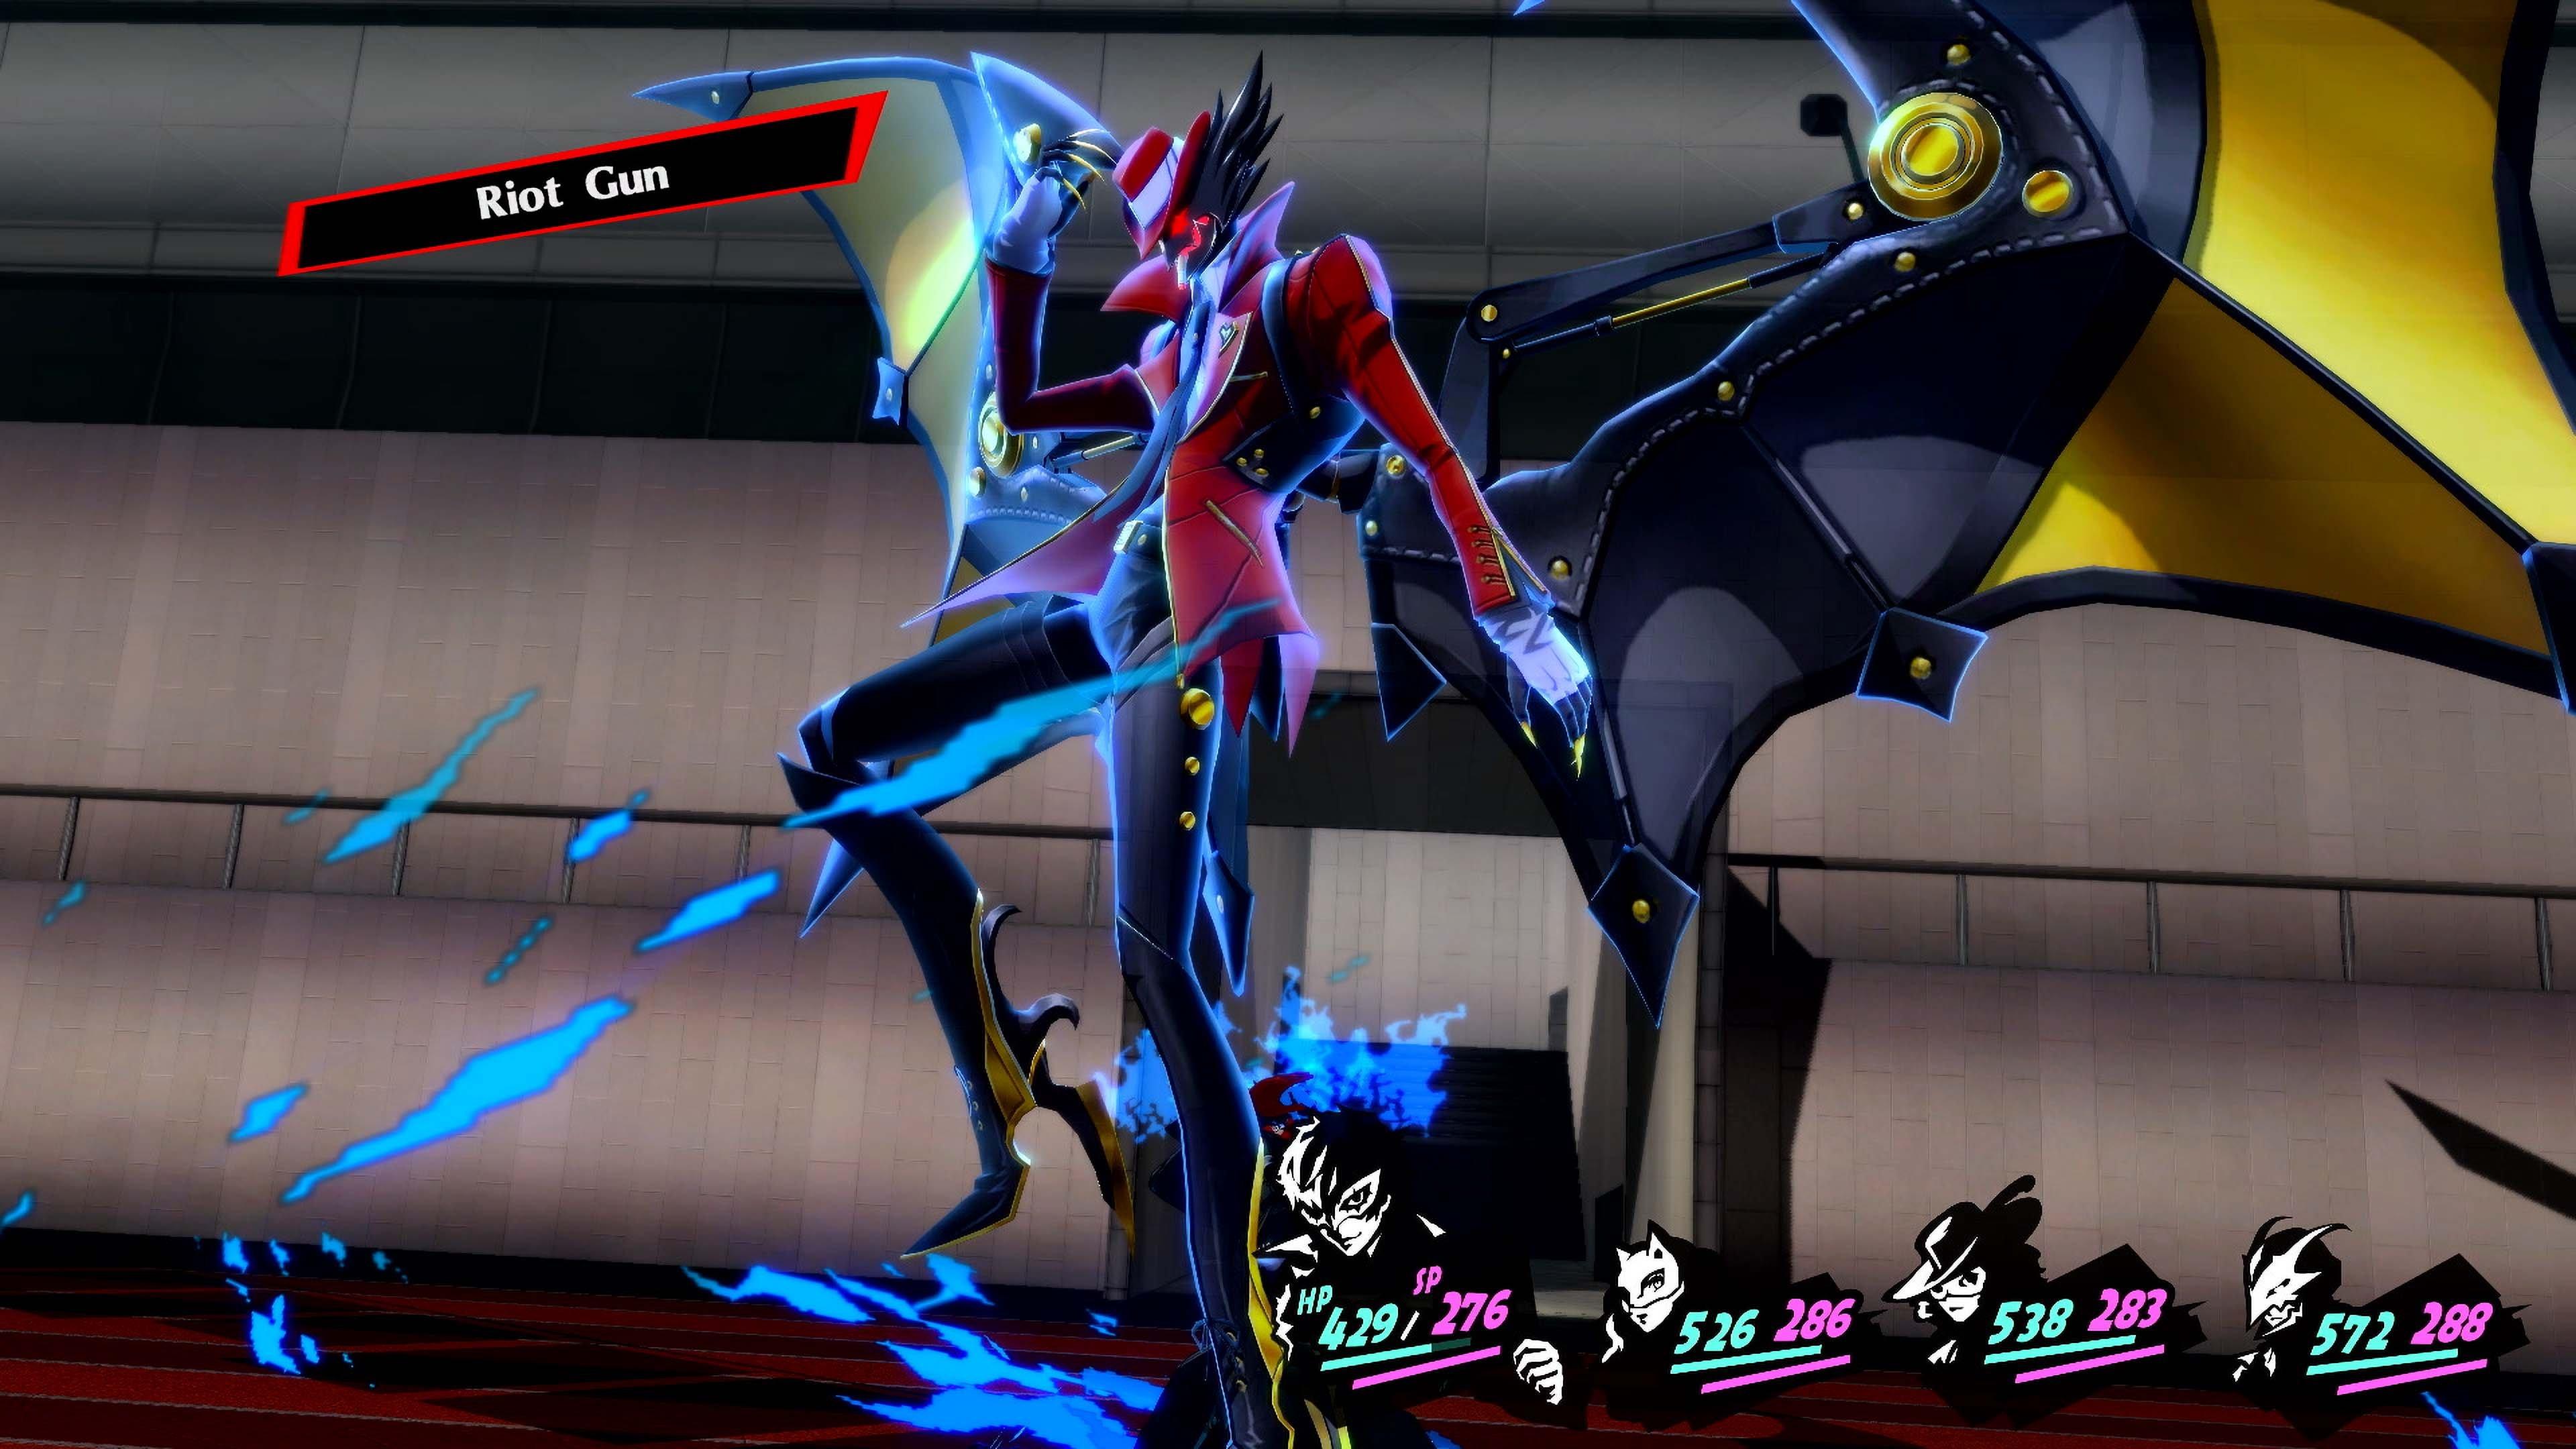 Persona 5 Royal is out on PC, Xbox, and Switch today